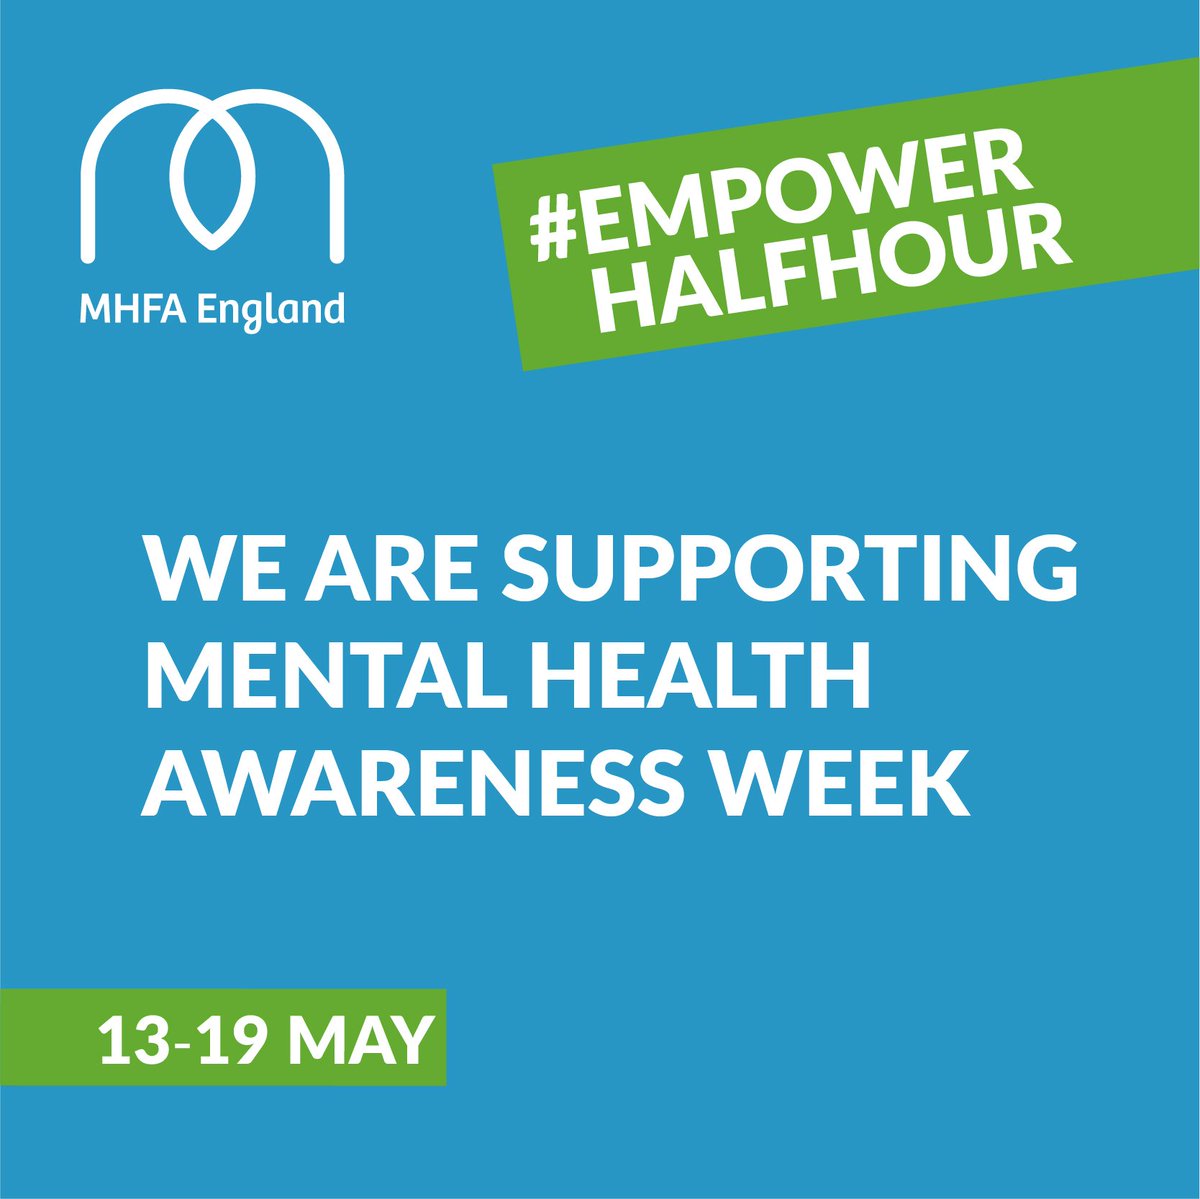 We have 260 mental health first aiders across the organisation providing support for CPS staff experiencing mental health issues. We have also pledged our commitment to #workplacewellbeing by signing the #WheresYourHeadAt? Workplace Manifesto #MentalHealthAwarenessWeek2019